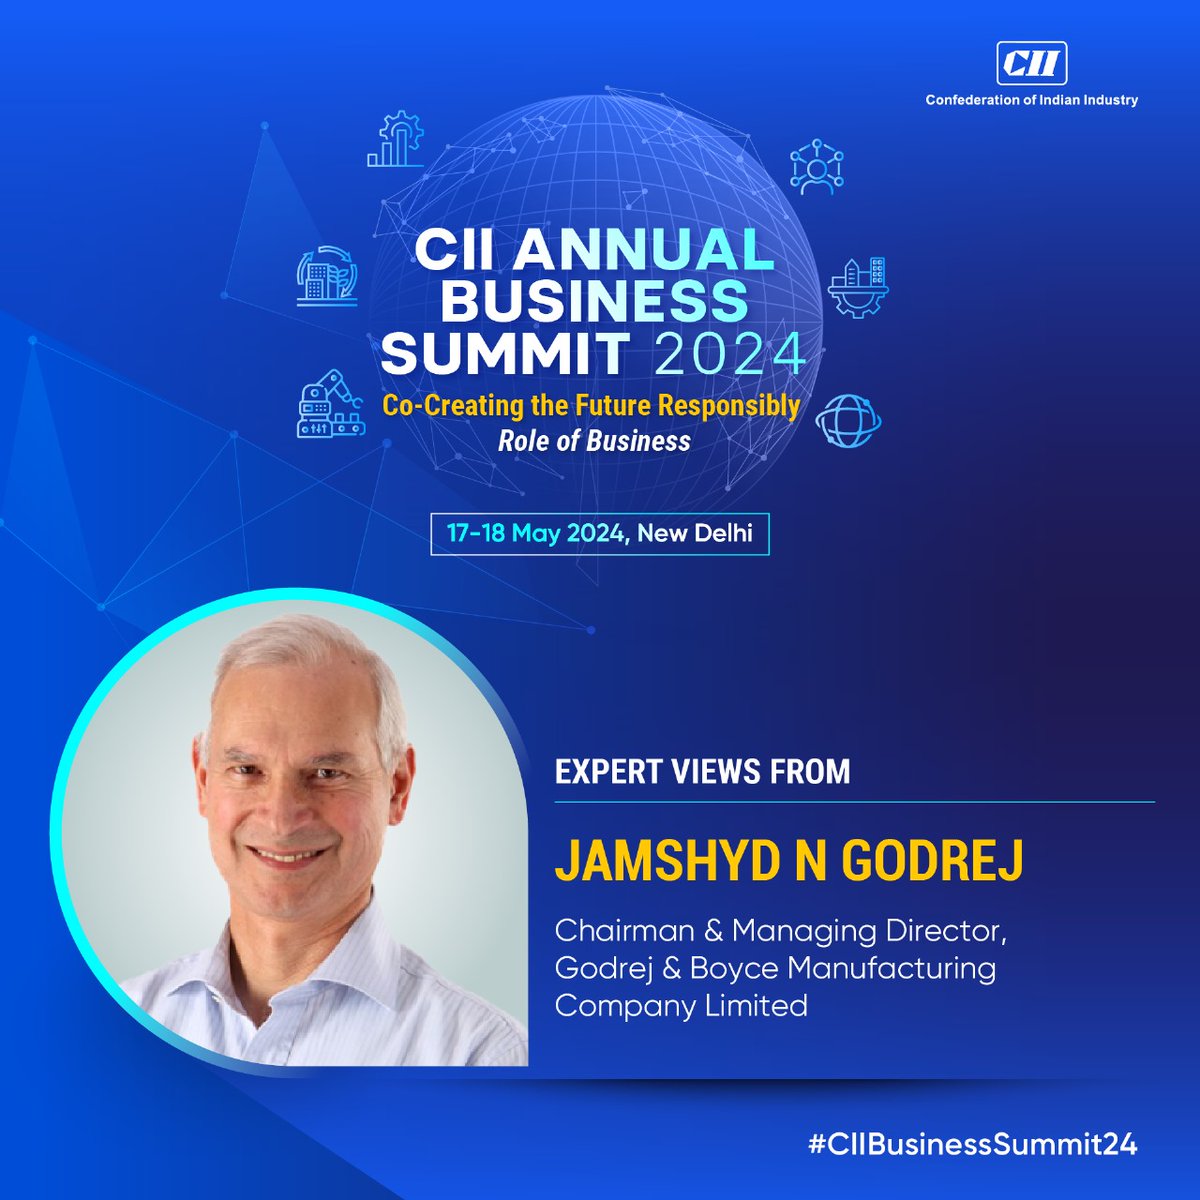 Listen to Jamshyd N Godrej, Chairman & Managing Director, @GodrejAndBoyce Manufacturing Company Limited share thoughts at the CII Annual Business Summit 2024. Listen to insightful discussions as thought leaders and experts collaboratively map out a trajectory for India's growth.